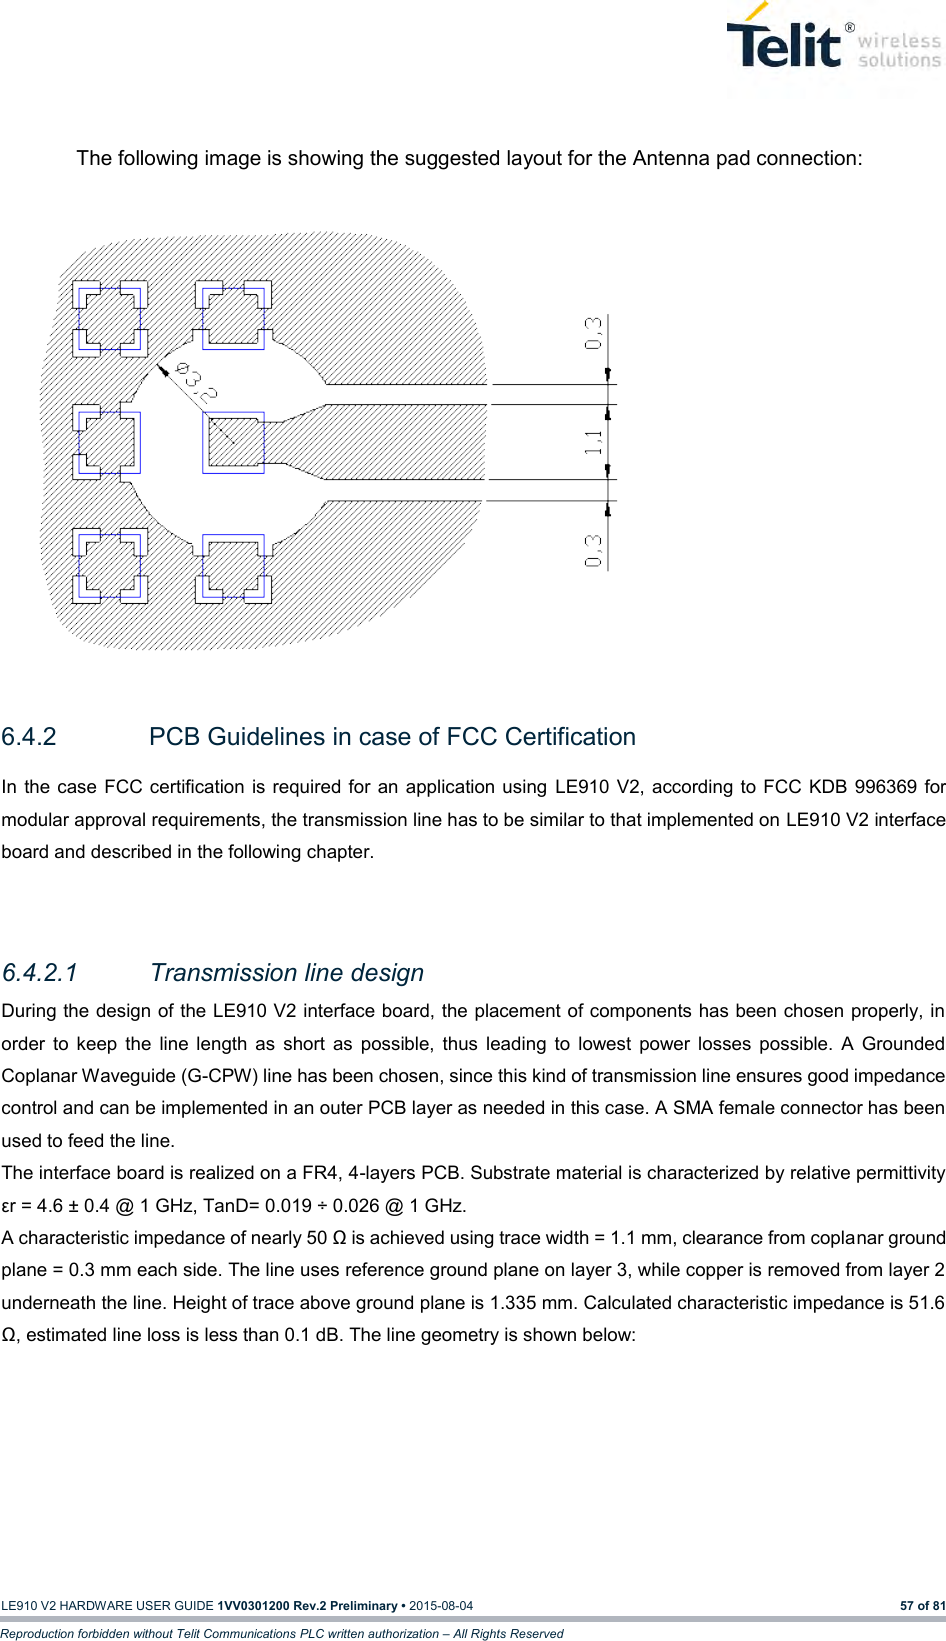   LE910 V2 HARDWARE USER GUIDE 1VV0301200 Rev.2 Preliminary • 2015-08-04 57 of 81 Reproduction forbidden without Telit Communications PLC written authorization – All Rights Reserved  The following image is showing the suggested layout for the Antenna pad connection:               6.4.2  PCB Guidelines in case of FCC Certification In the case FCC certification  is required for  an application using  LE910 V2,  according to FCC  KDB 996369 for modular approval requirements, the transmission line has to be similar to that implemented on LE910 V2 interface board and described in the following chapter.  6.4.2.1  Transmission line design During the design of the LE910 V2 interface board, the placement of components has been chosen properly, in order  to  keep  the  line  length  as  short  as  possible,  thus  leading  to  lowest  power  losses  possible.  A  Grounded Coplanar Waveguide (G-CPW) line has been chosen, since this kind of transmission line ensures good impedance control and can be implemented in an outer PCB layer as needed in this case. A SMA female connector has been used to feed the line. The interface board is realized on a FR4, 4-layers PCB. Substrate material is characterized by relative permittivity εr = 4.6 ± 0.4 @ 1 GHz, TanD= 0.019 ÷ 0.026 @ 1 GHz. A characteristic impedance of nearly 50 Ω is achieved using trace width = 1.1 mm, clearance from coplanar ground plane = 0.3 mm each side. The line uses reference ground plane on layer 3, while copper is removed from layer 2 underneath the line. Height of trace above ground plane is 1.335 mm. Calculated characteristic impedance is 51.6 Ω, estimated line loss is less than 0.1 dB. The line geometry is shown below: 